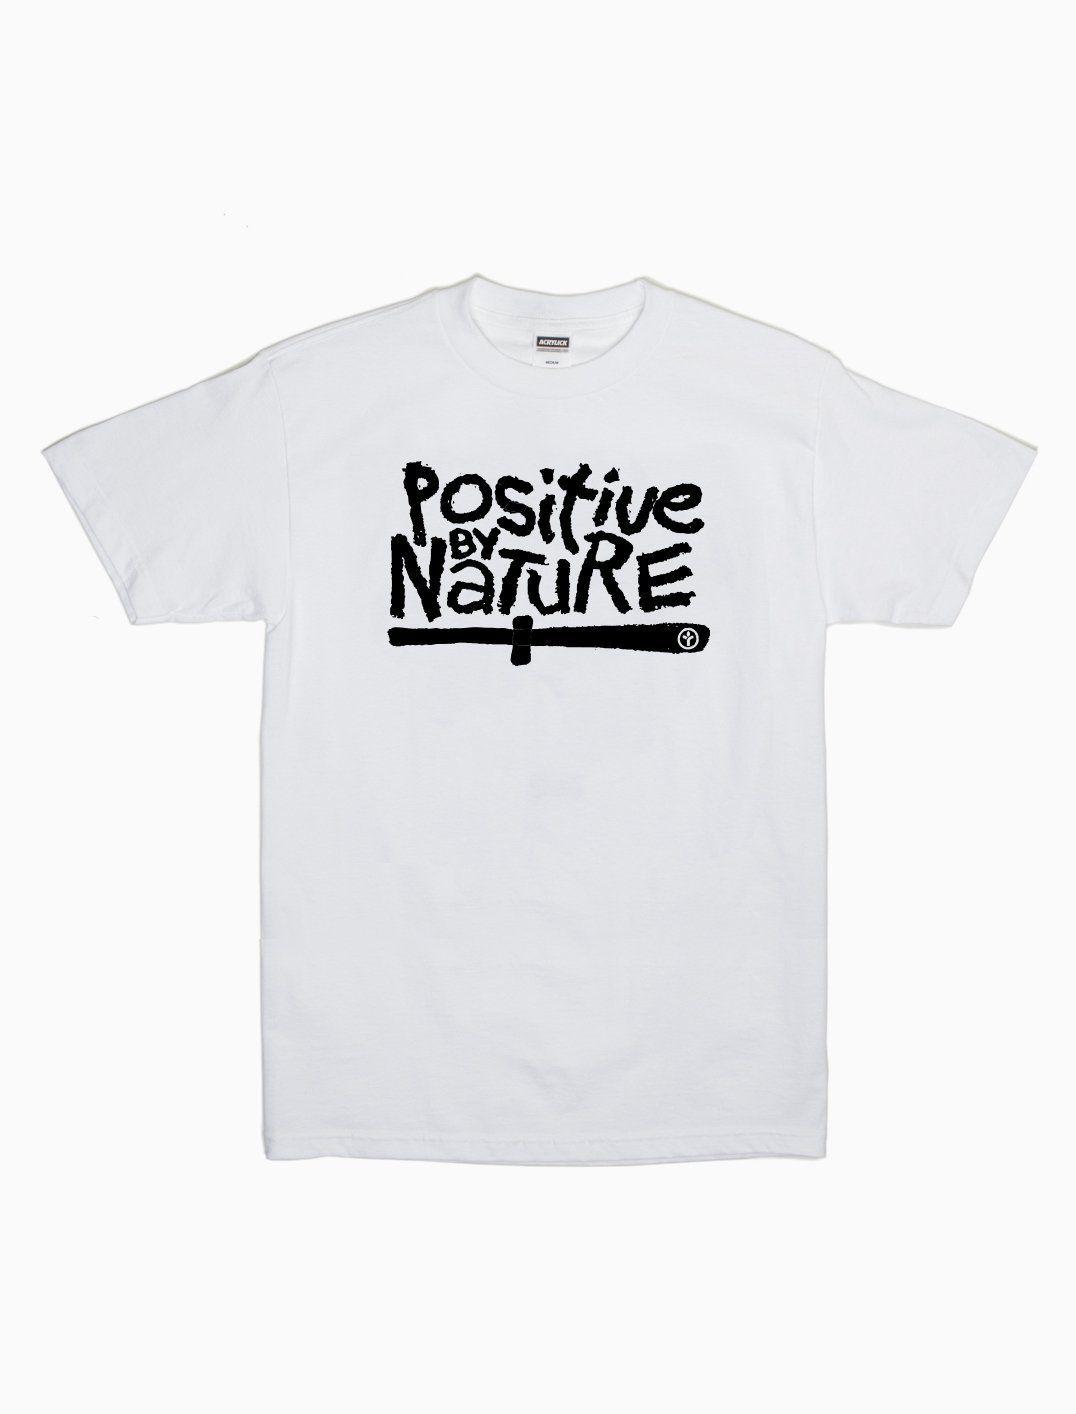 Acrylick Clothing Logo - Positive By Nature Tee. ACRYLICK®